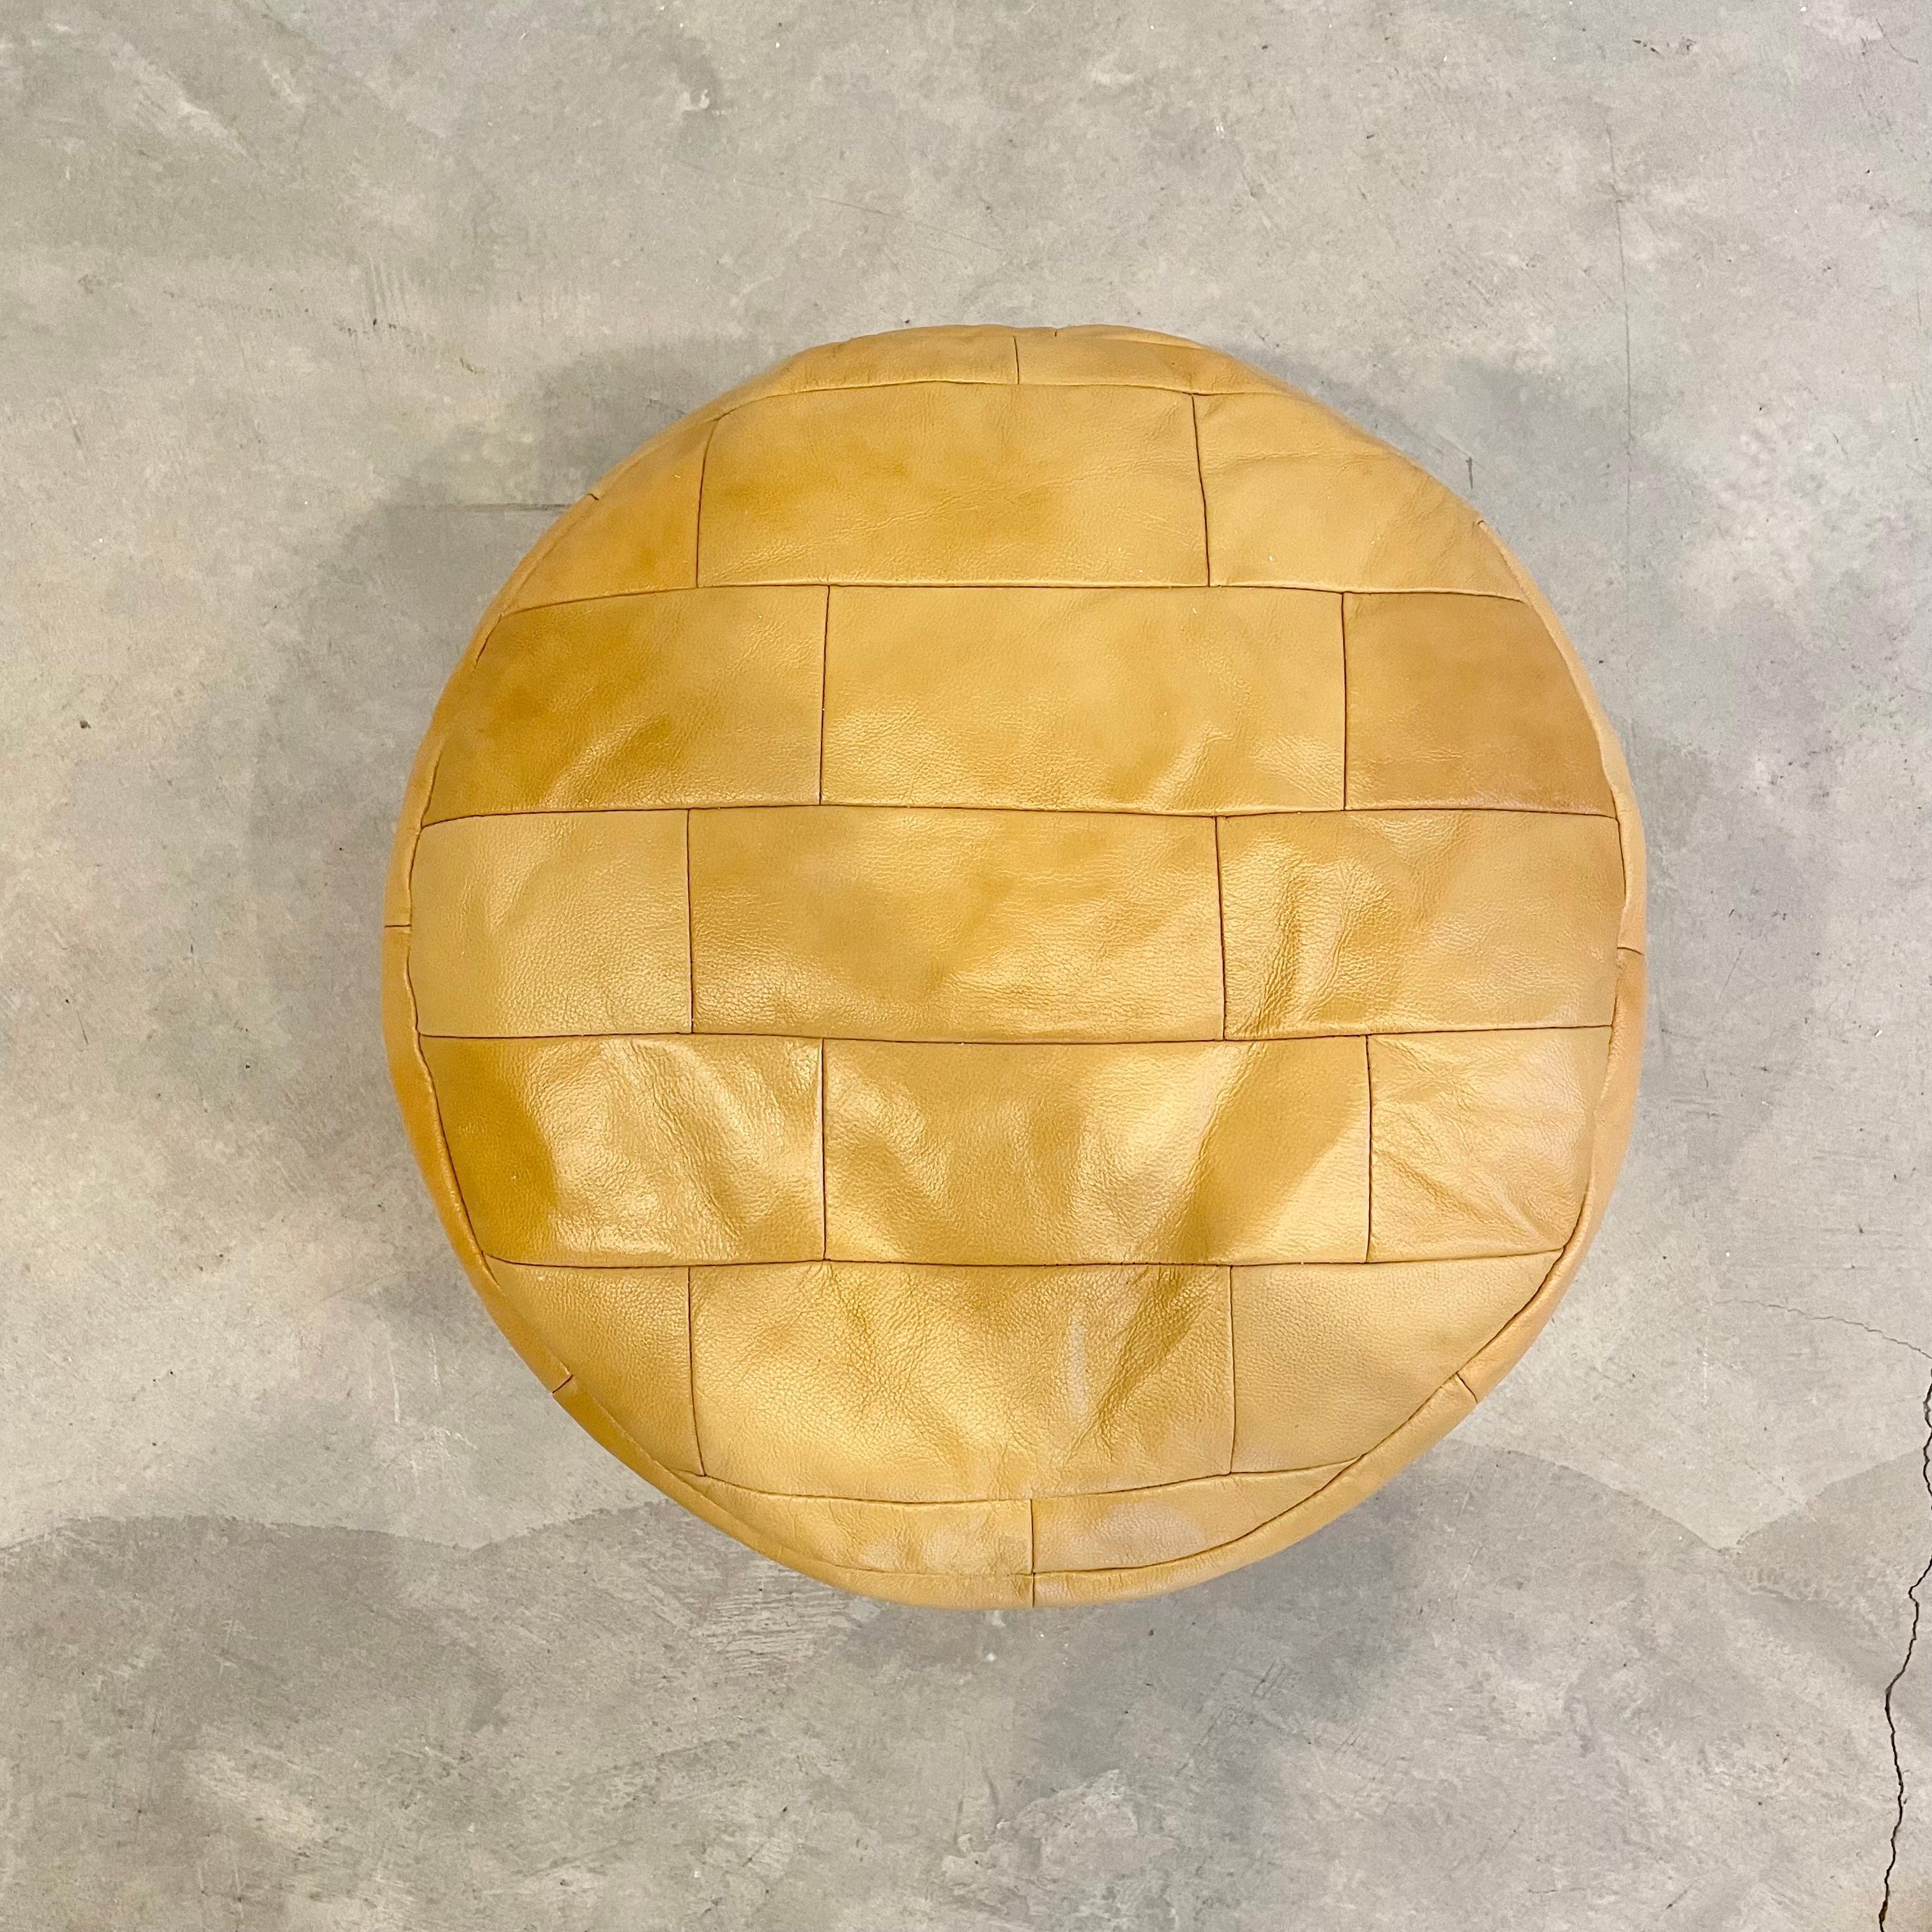 Stunning golden brown leather pouf/ottoman by Swiss designer De Sede with square patchwork. Handmade with wonderful faded patina. Gorgeous accent piece. Good vintage condition. Wear appropriate with age. Brand new filler. Perfect living room decor,